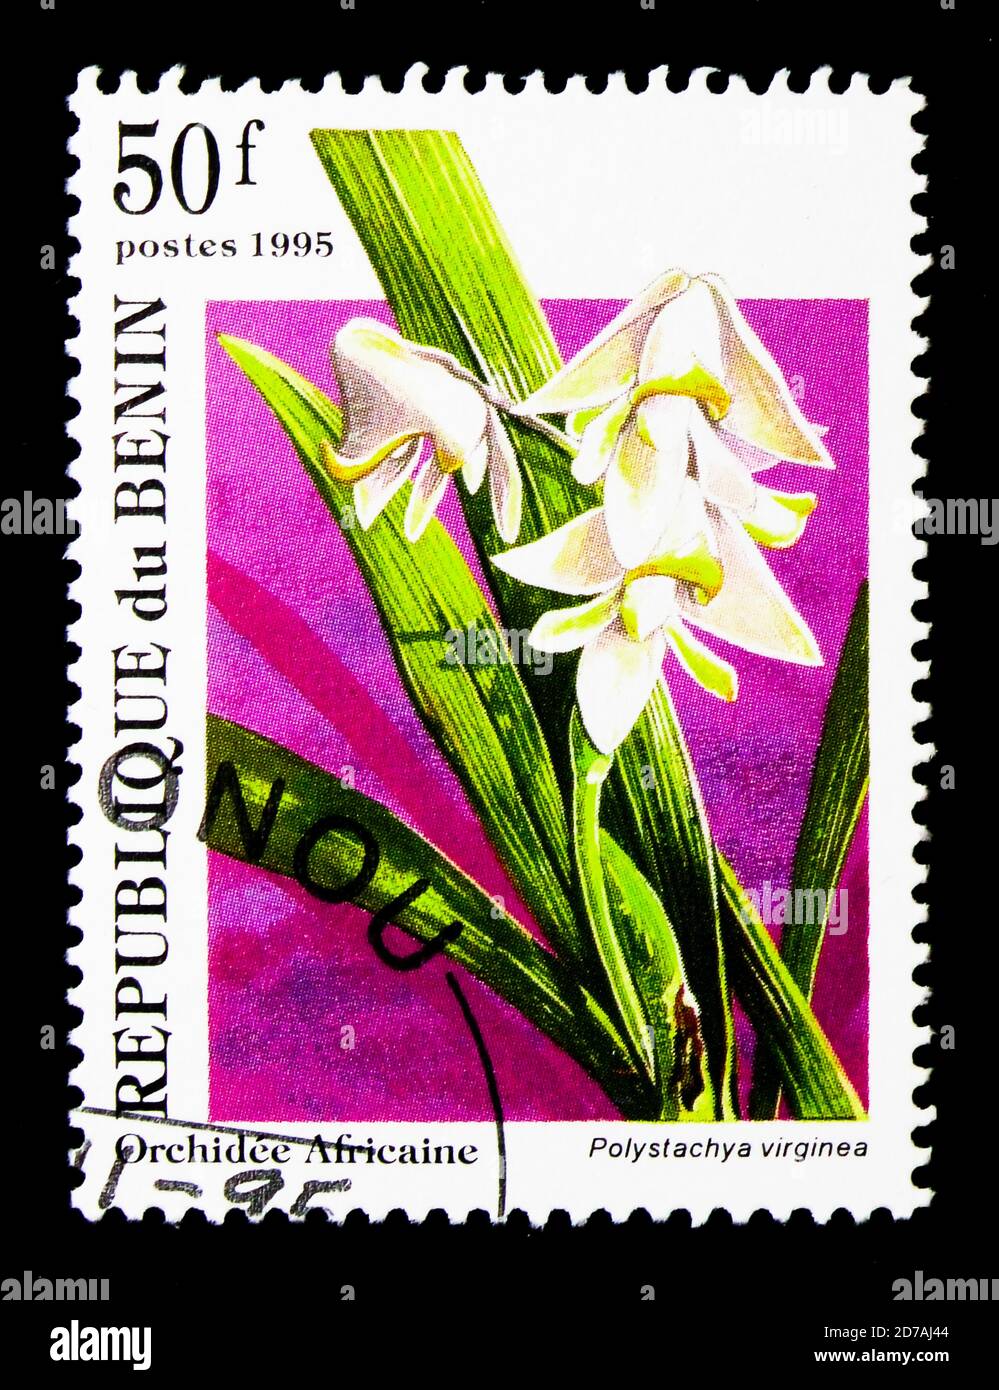 MOSCOW, RUSSIA - NOVEMBER 26, 2017: A stamp printed in Benin shows Polystachya virginea, African Orchids serie, circa 1995 Stock Photo